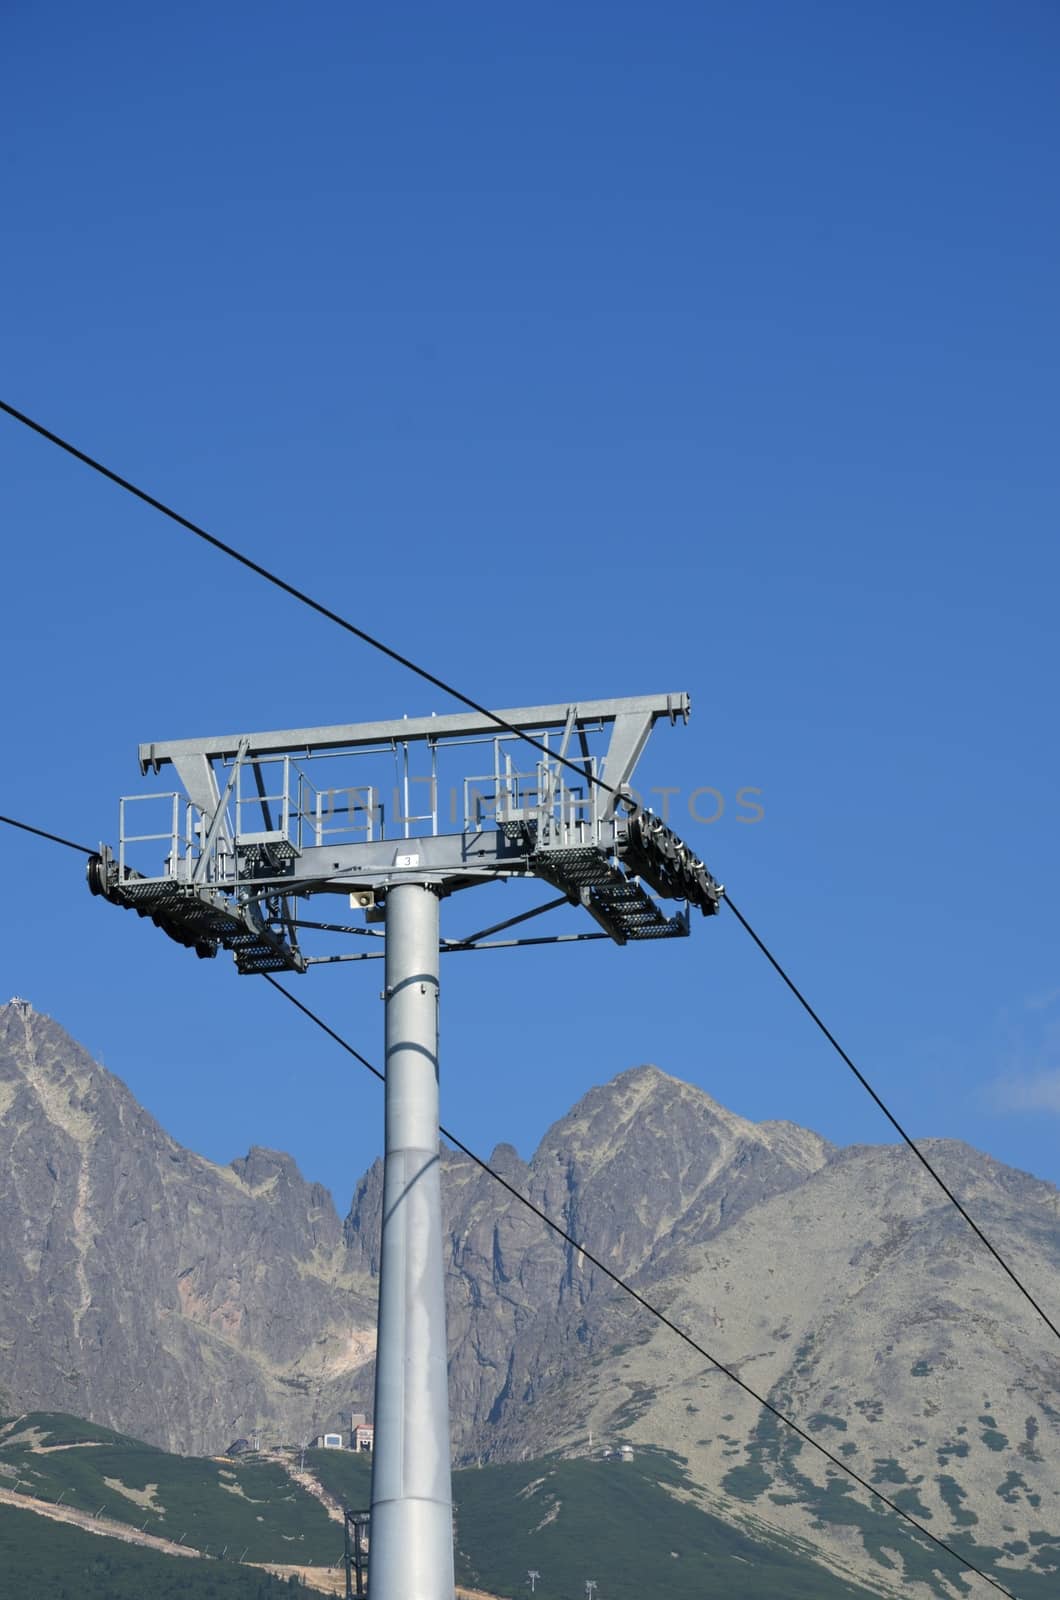 Cable car mechanism with mountains in background